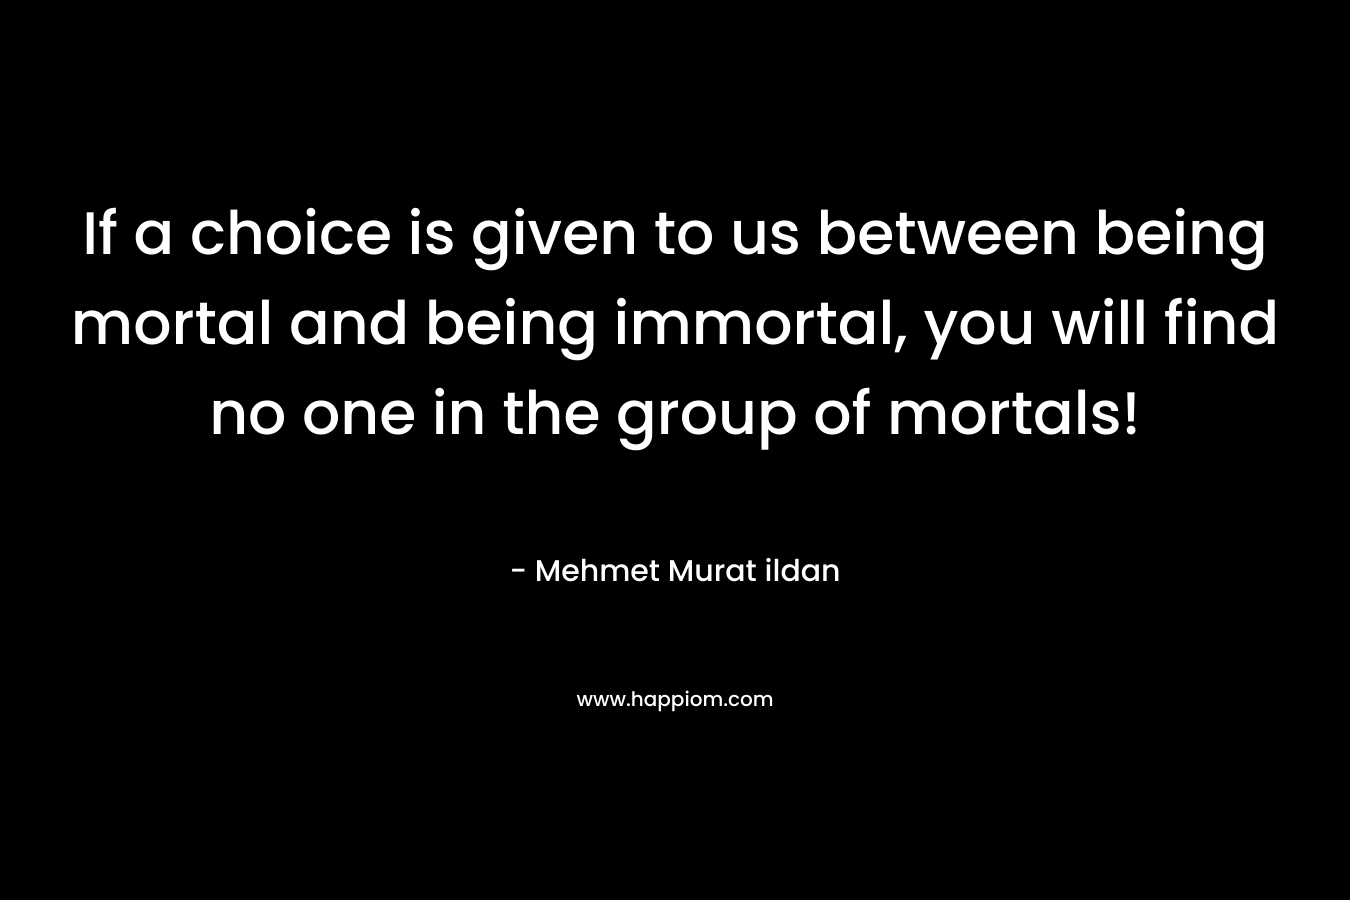 If a choice is given to us between being mortal and being immortal, you will find no one in the group of mortals! – Mehmet Murat ildan